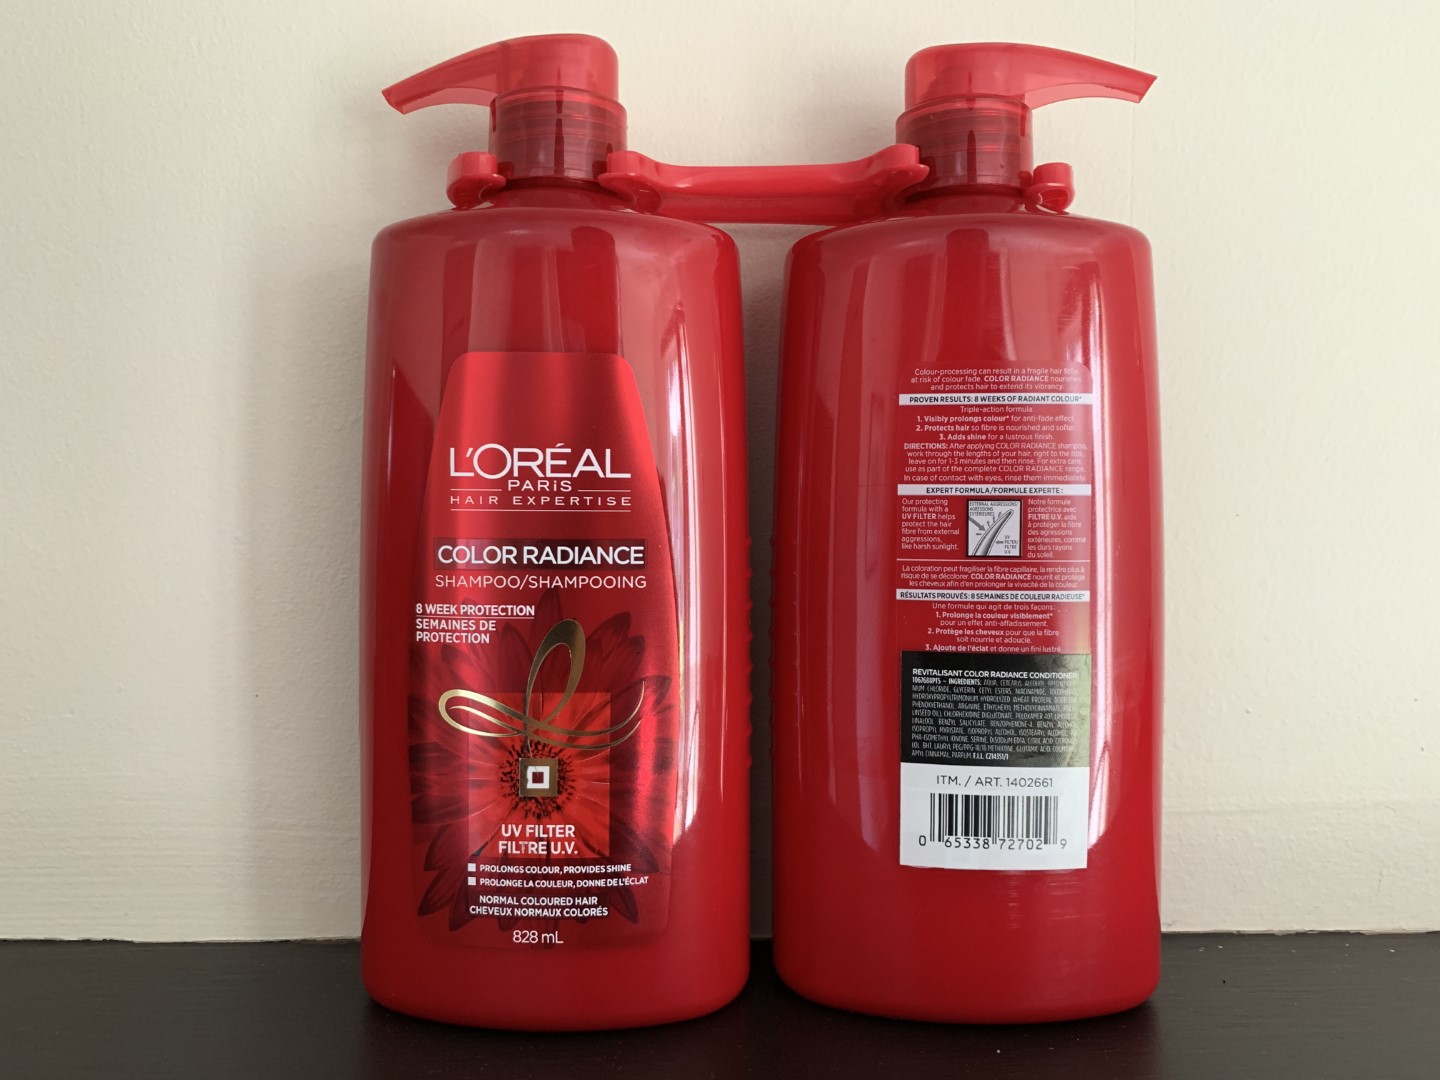 Color Radiance Hair Expertise Shampoo and Conditioner - Costco West Blog